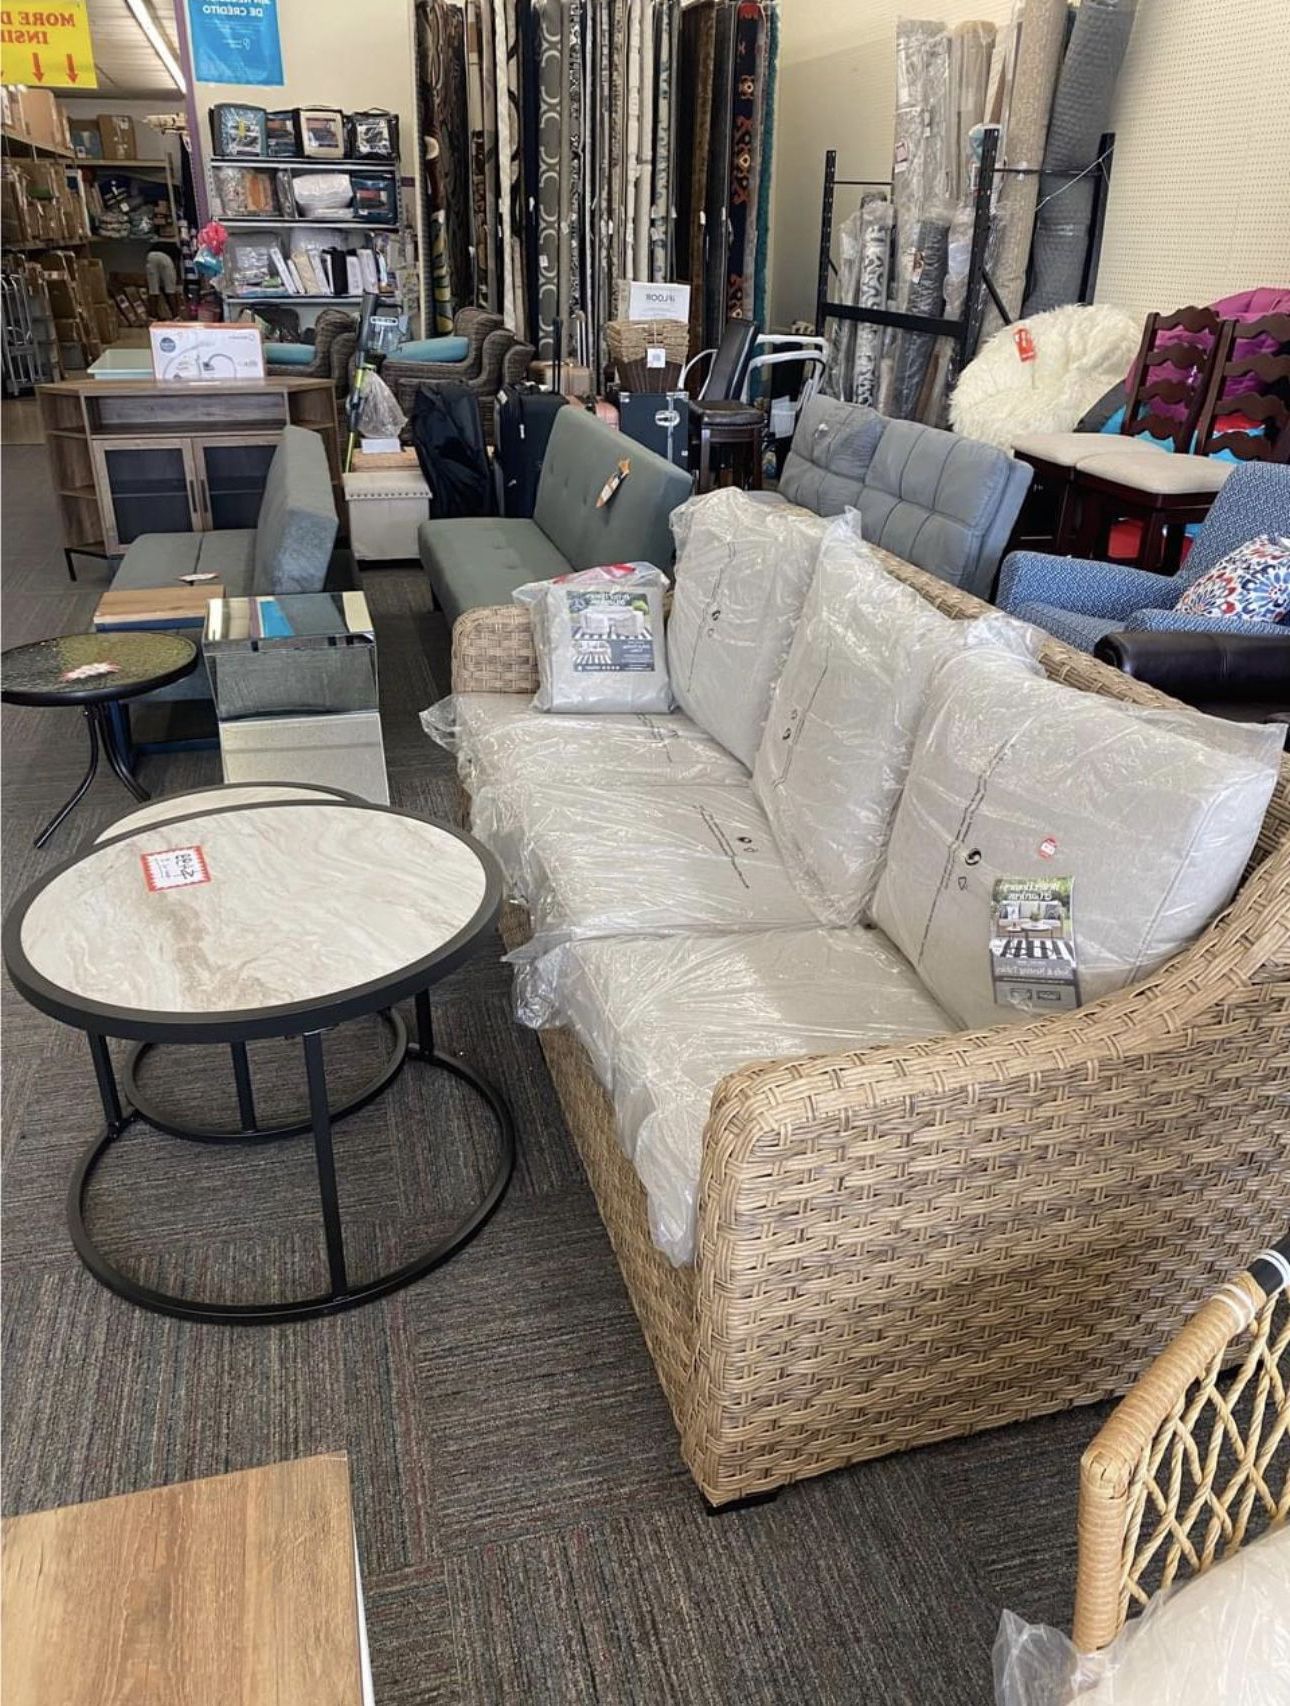 3 Piece Sofa & Nesting Table Set Intended For Latest Better Homes & Gardens 3 Piece Sofa & Nesting Table Set With Patio Cover  For Sale In Norfolk, Va – Offerup (View 8 of 15)